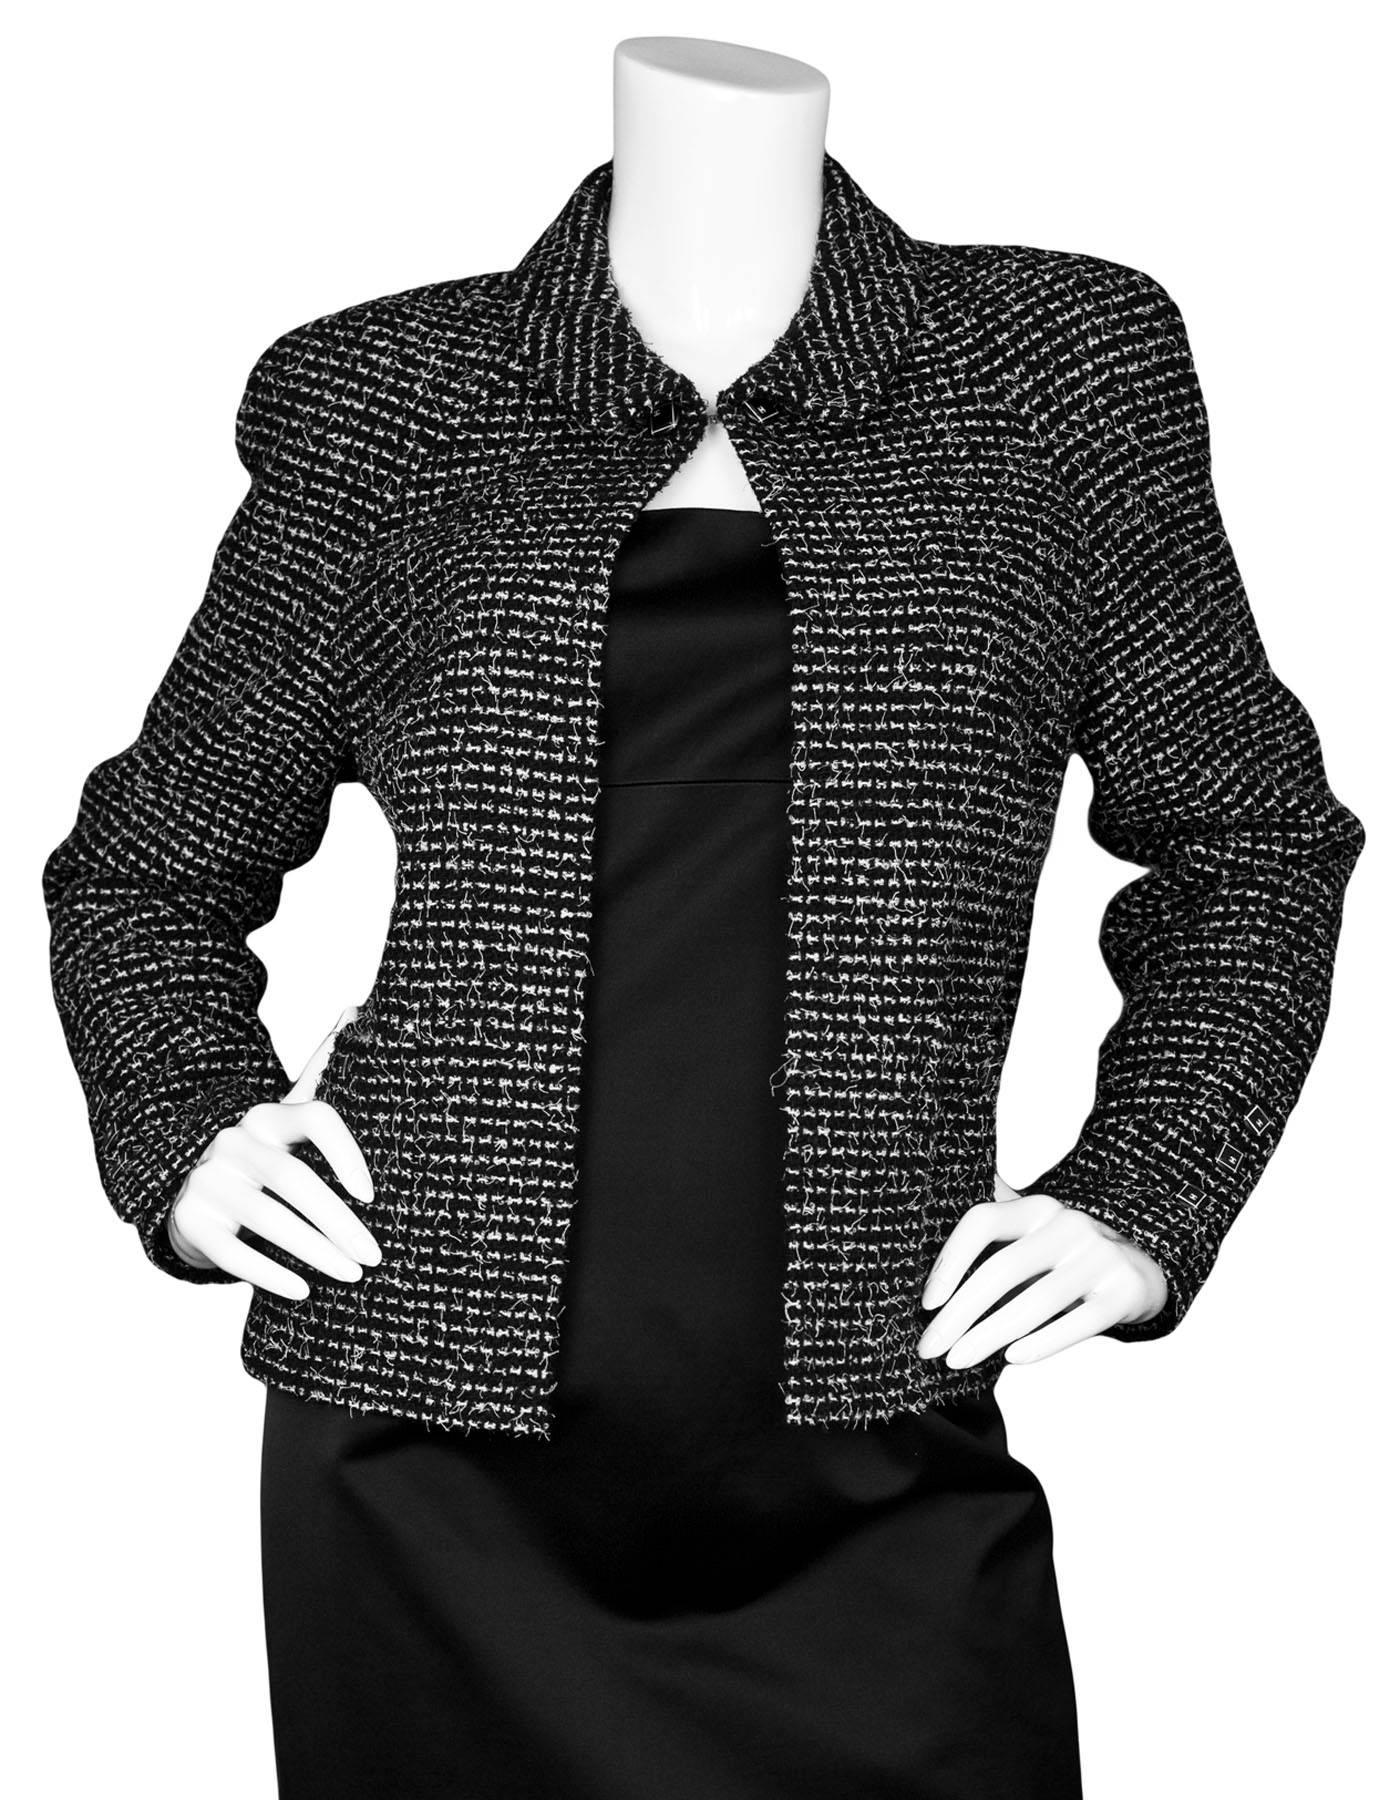 Chanel Wool Black & White Tweed Jacket Sz FR44

Made In: France
Year of Production: 2003
Color: Black, white
Composition: 70% wool, 30% nylon
Lining: Black textile
Closure/Opening: Open front with single button closure at neck
Overall Condition: